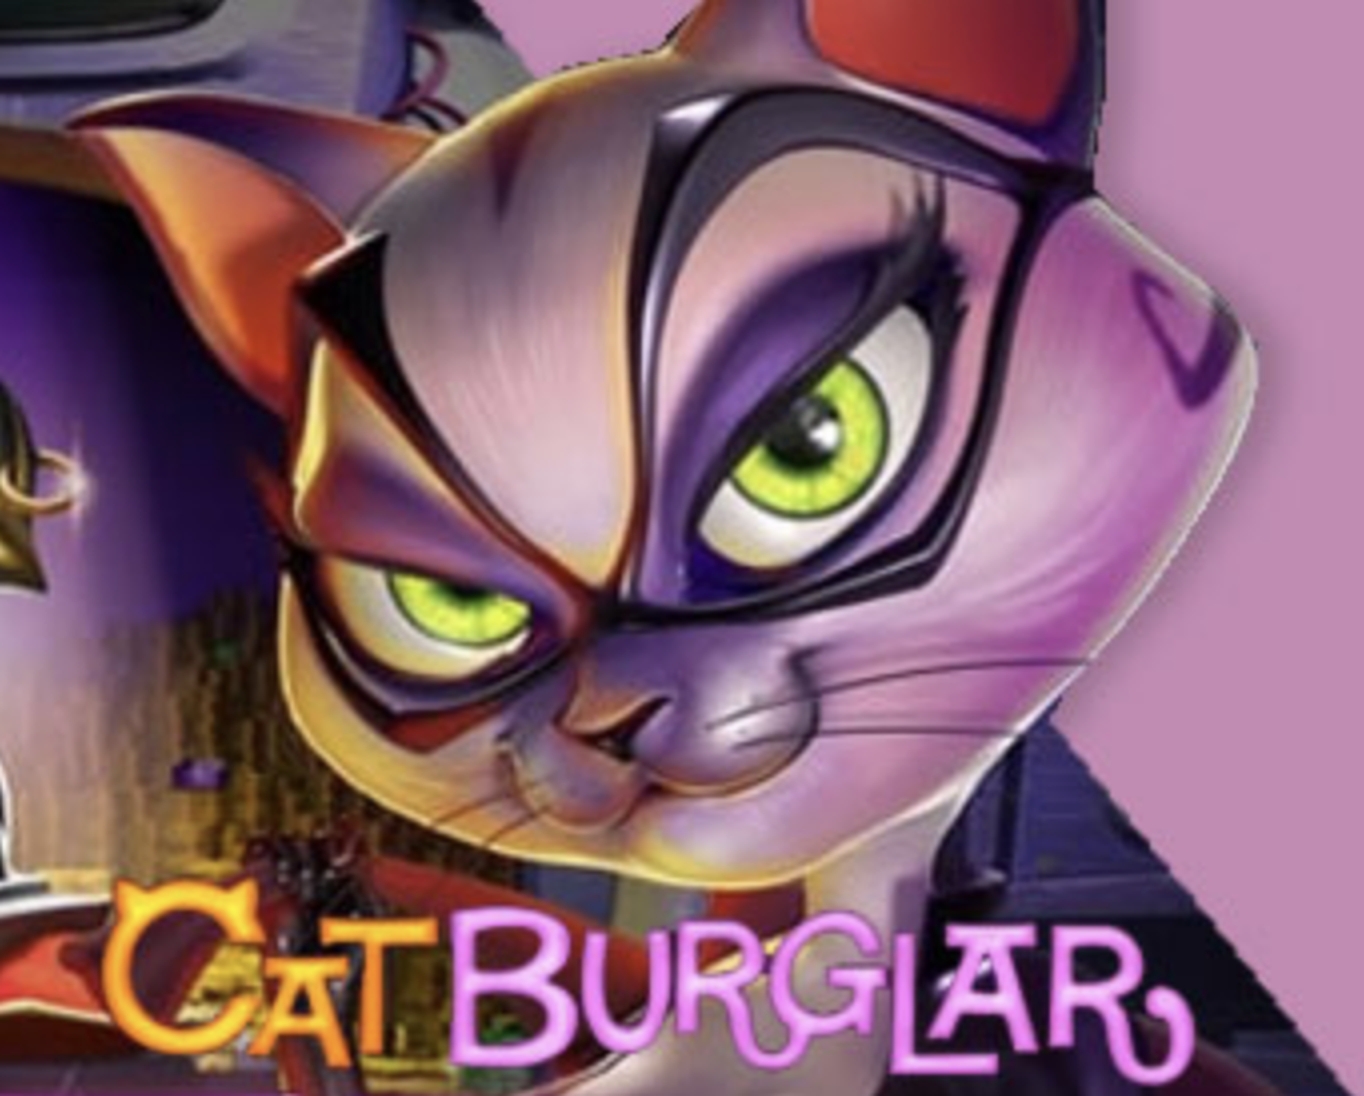 The Cat Burglar Online Slot Demo Game by Games Lab